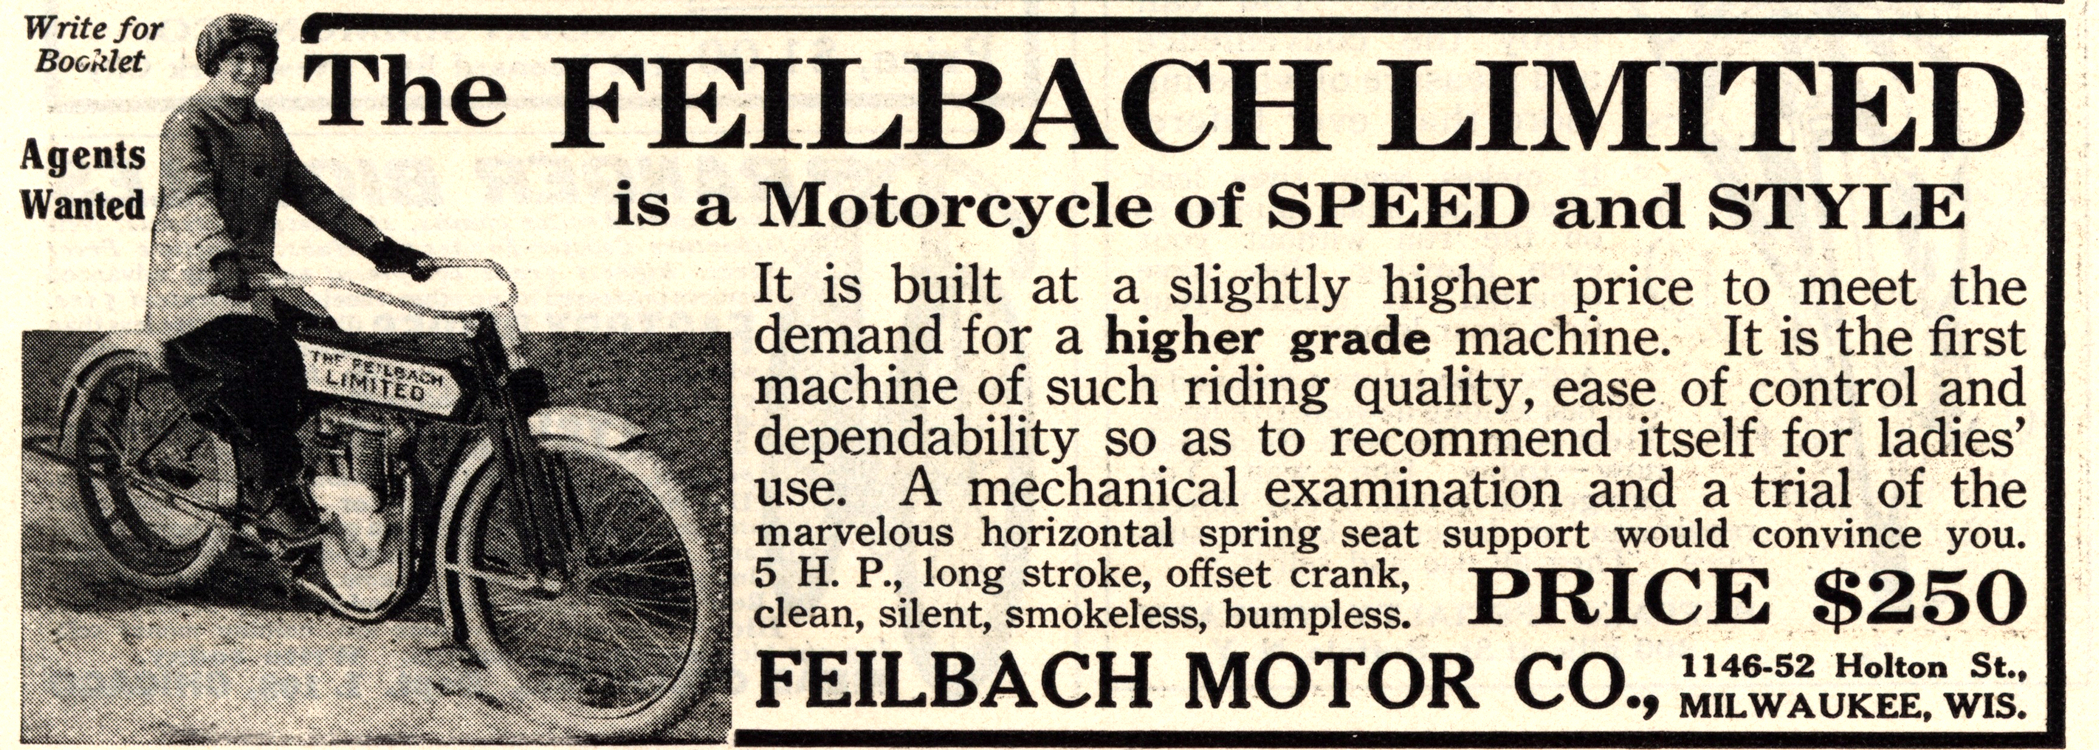 Motorcycles Feilbach Limited 1913 0001